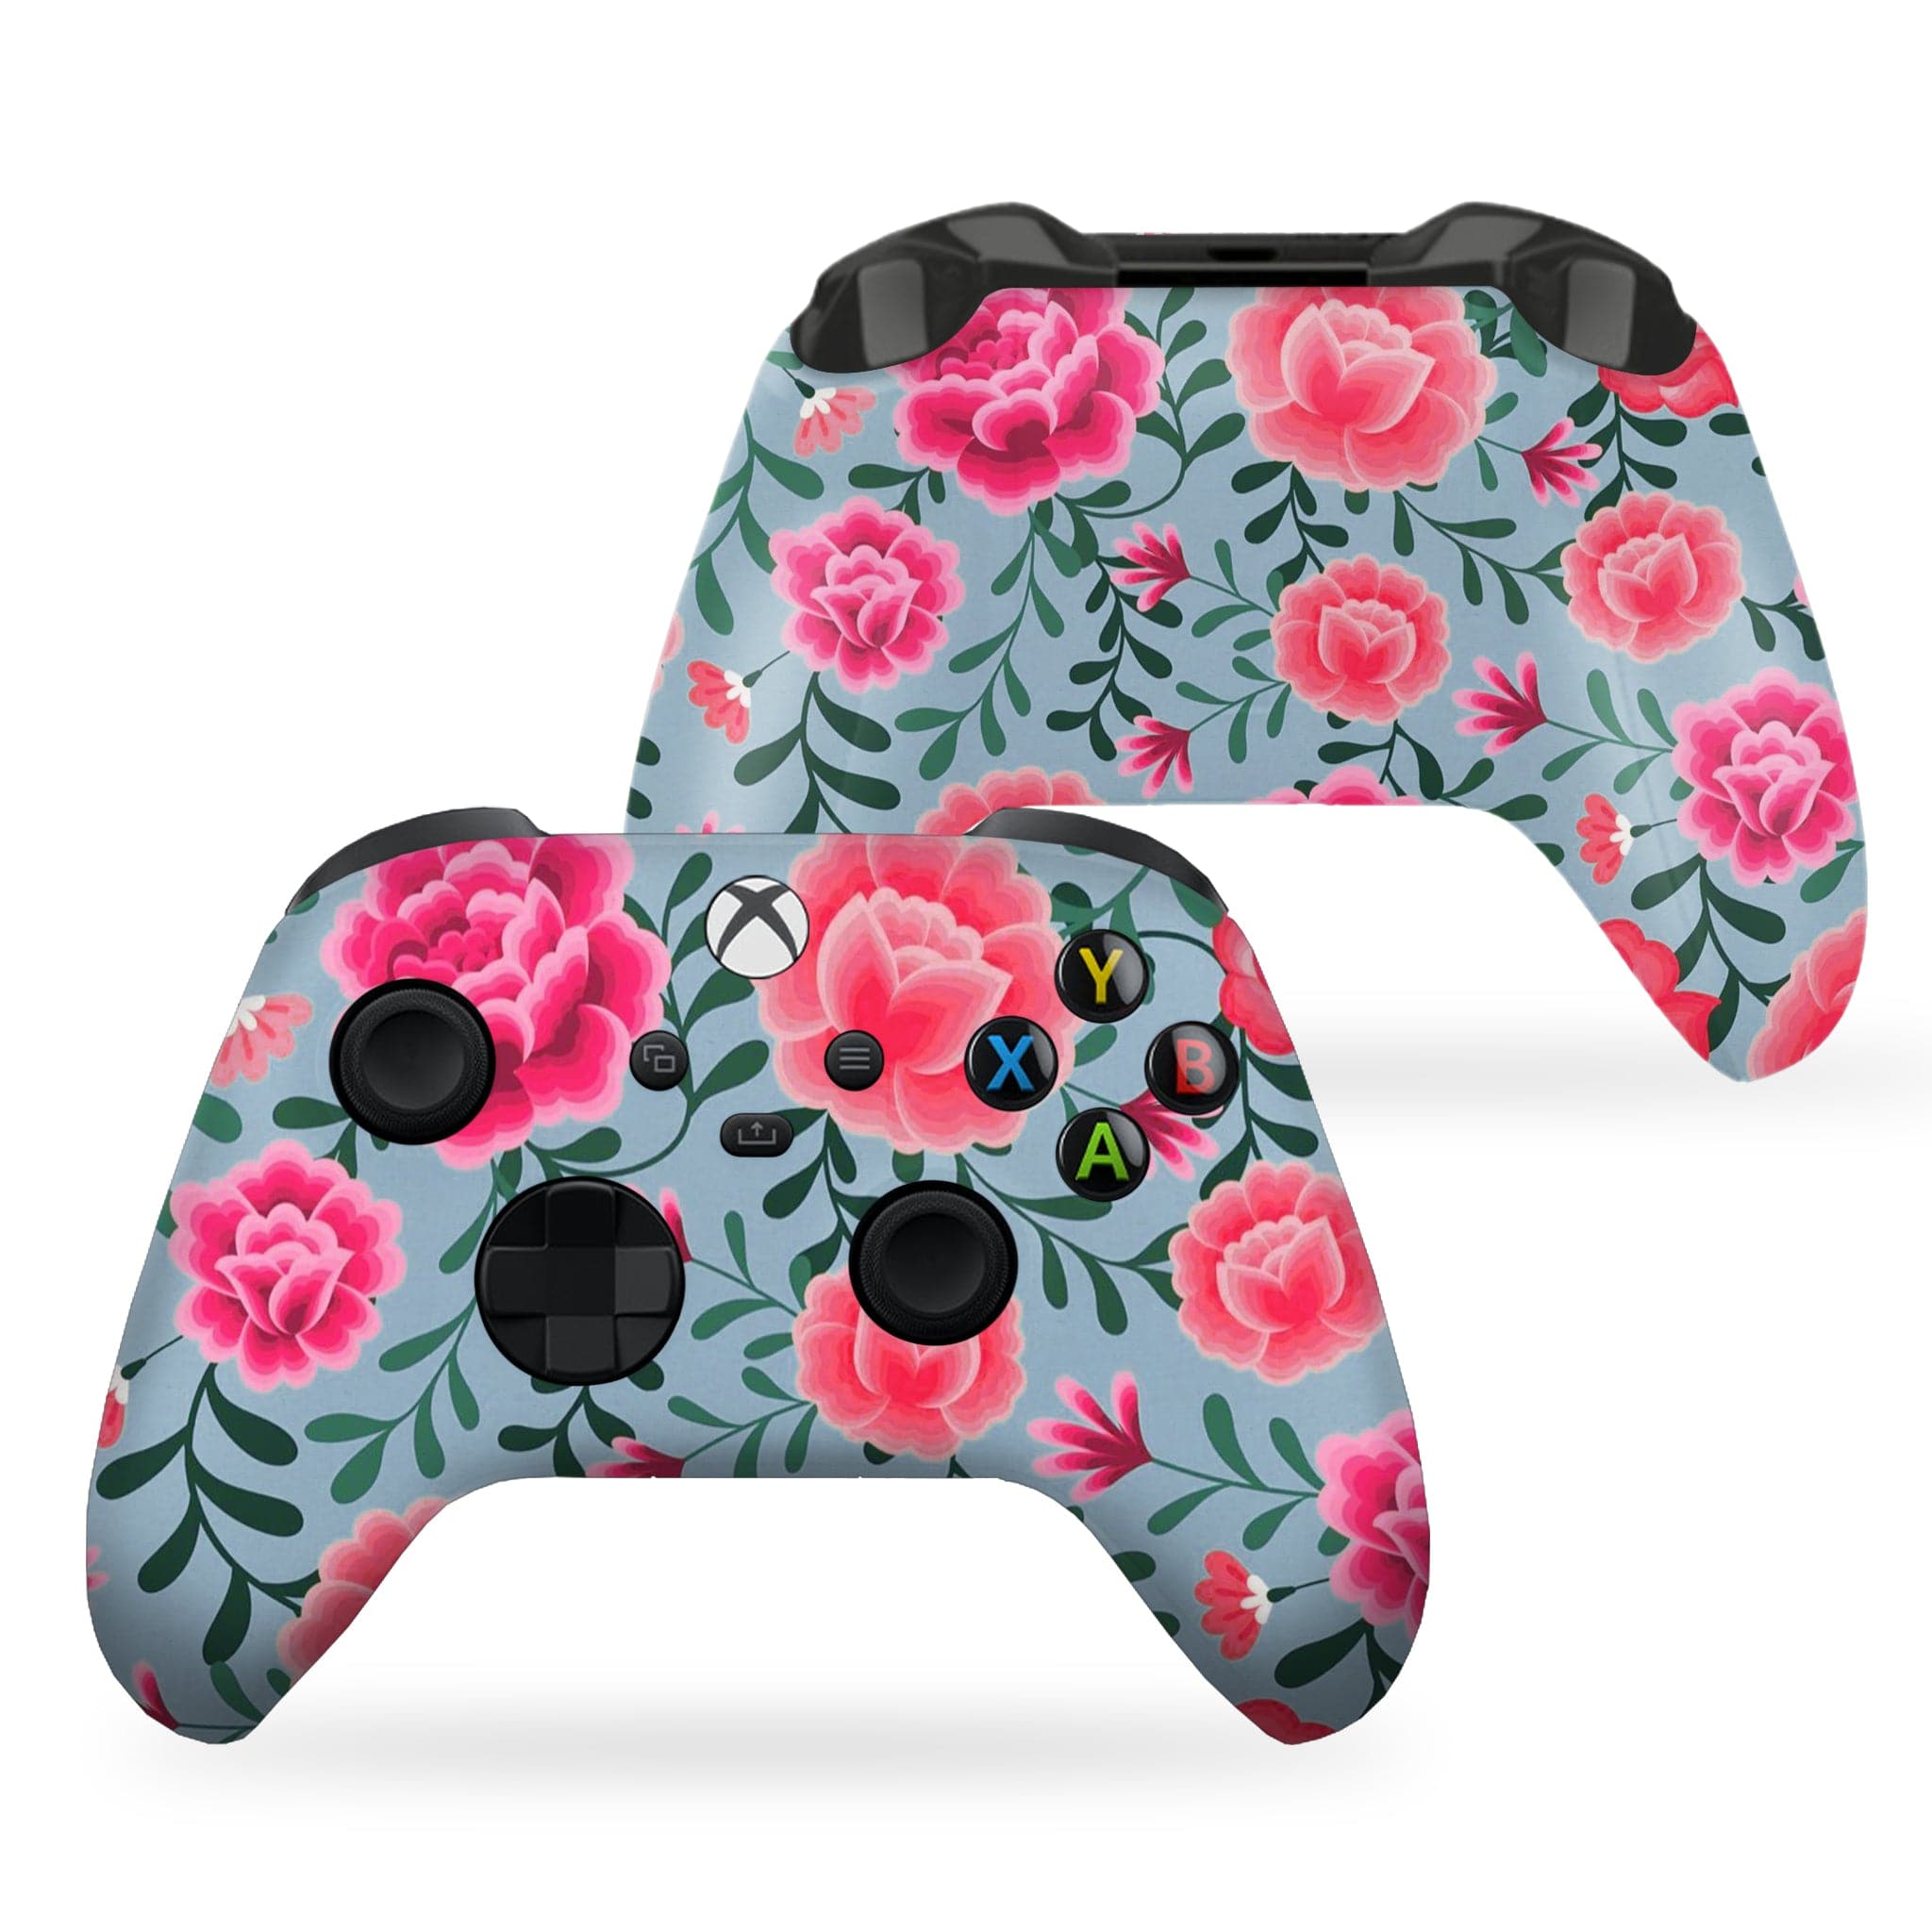 Blooming Flower Xbox Series X Controller